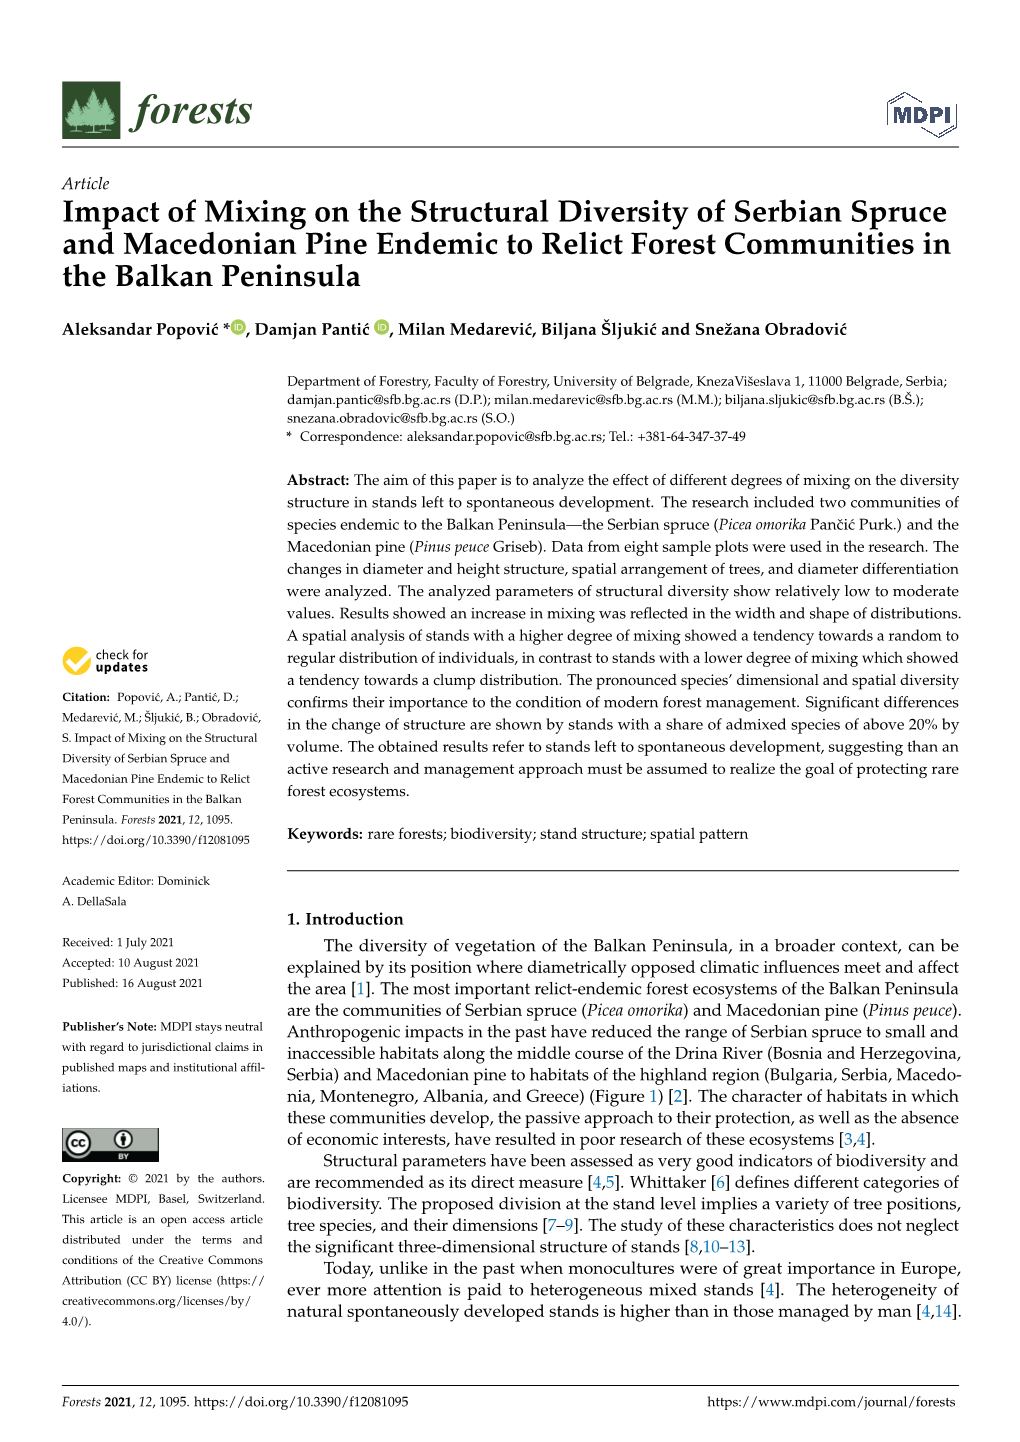 Impact of Mixing on the Structural Diversity of Serbian Spruce and Macedonian Pine Endemic to Relict Forest Communities in the Balkan Peninsula